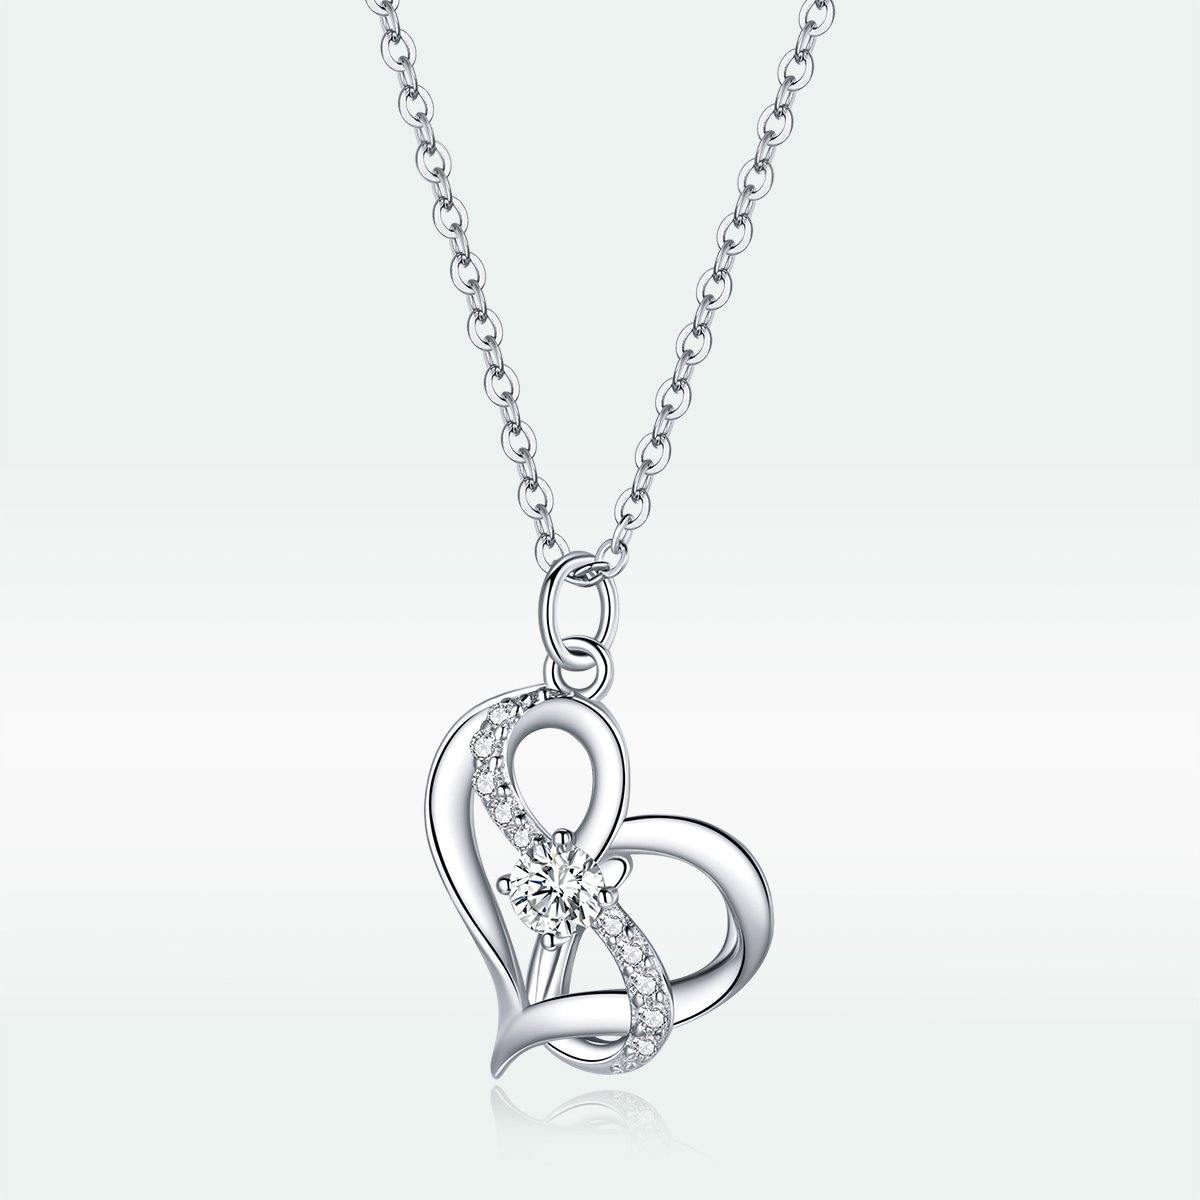 Infinity Heart 925 Sterling Silver Necklace - Aisllin Jewelry